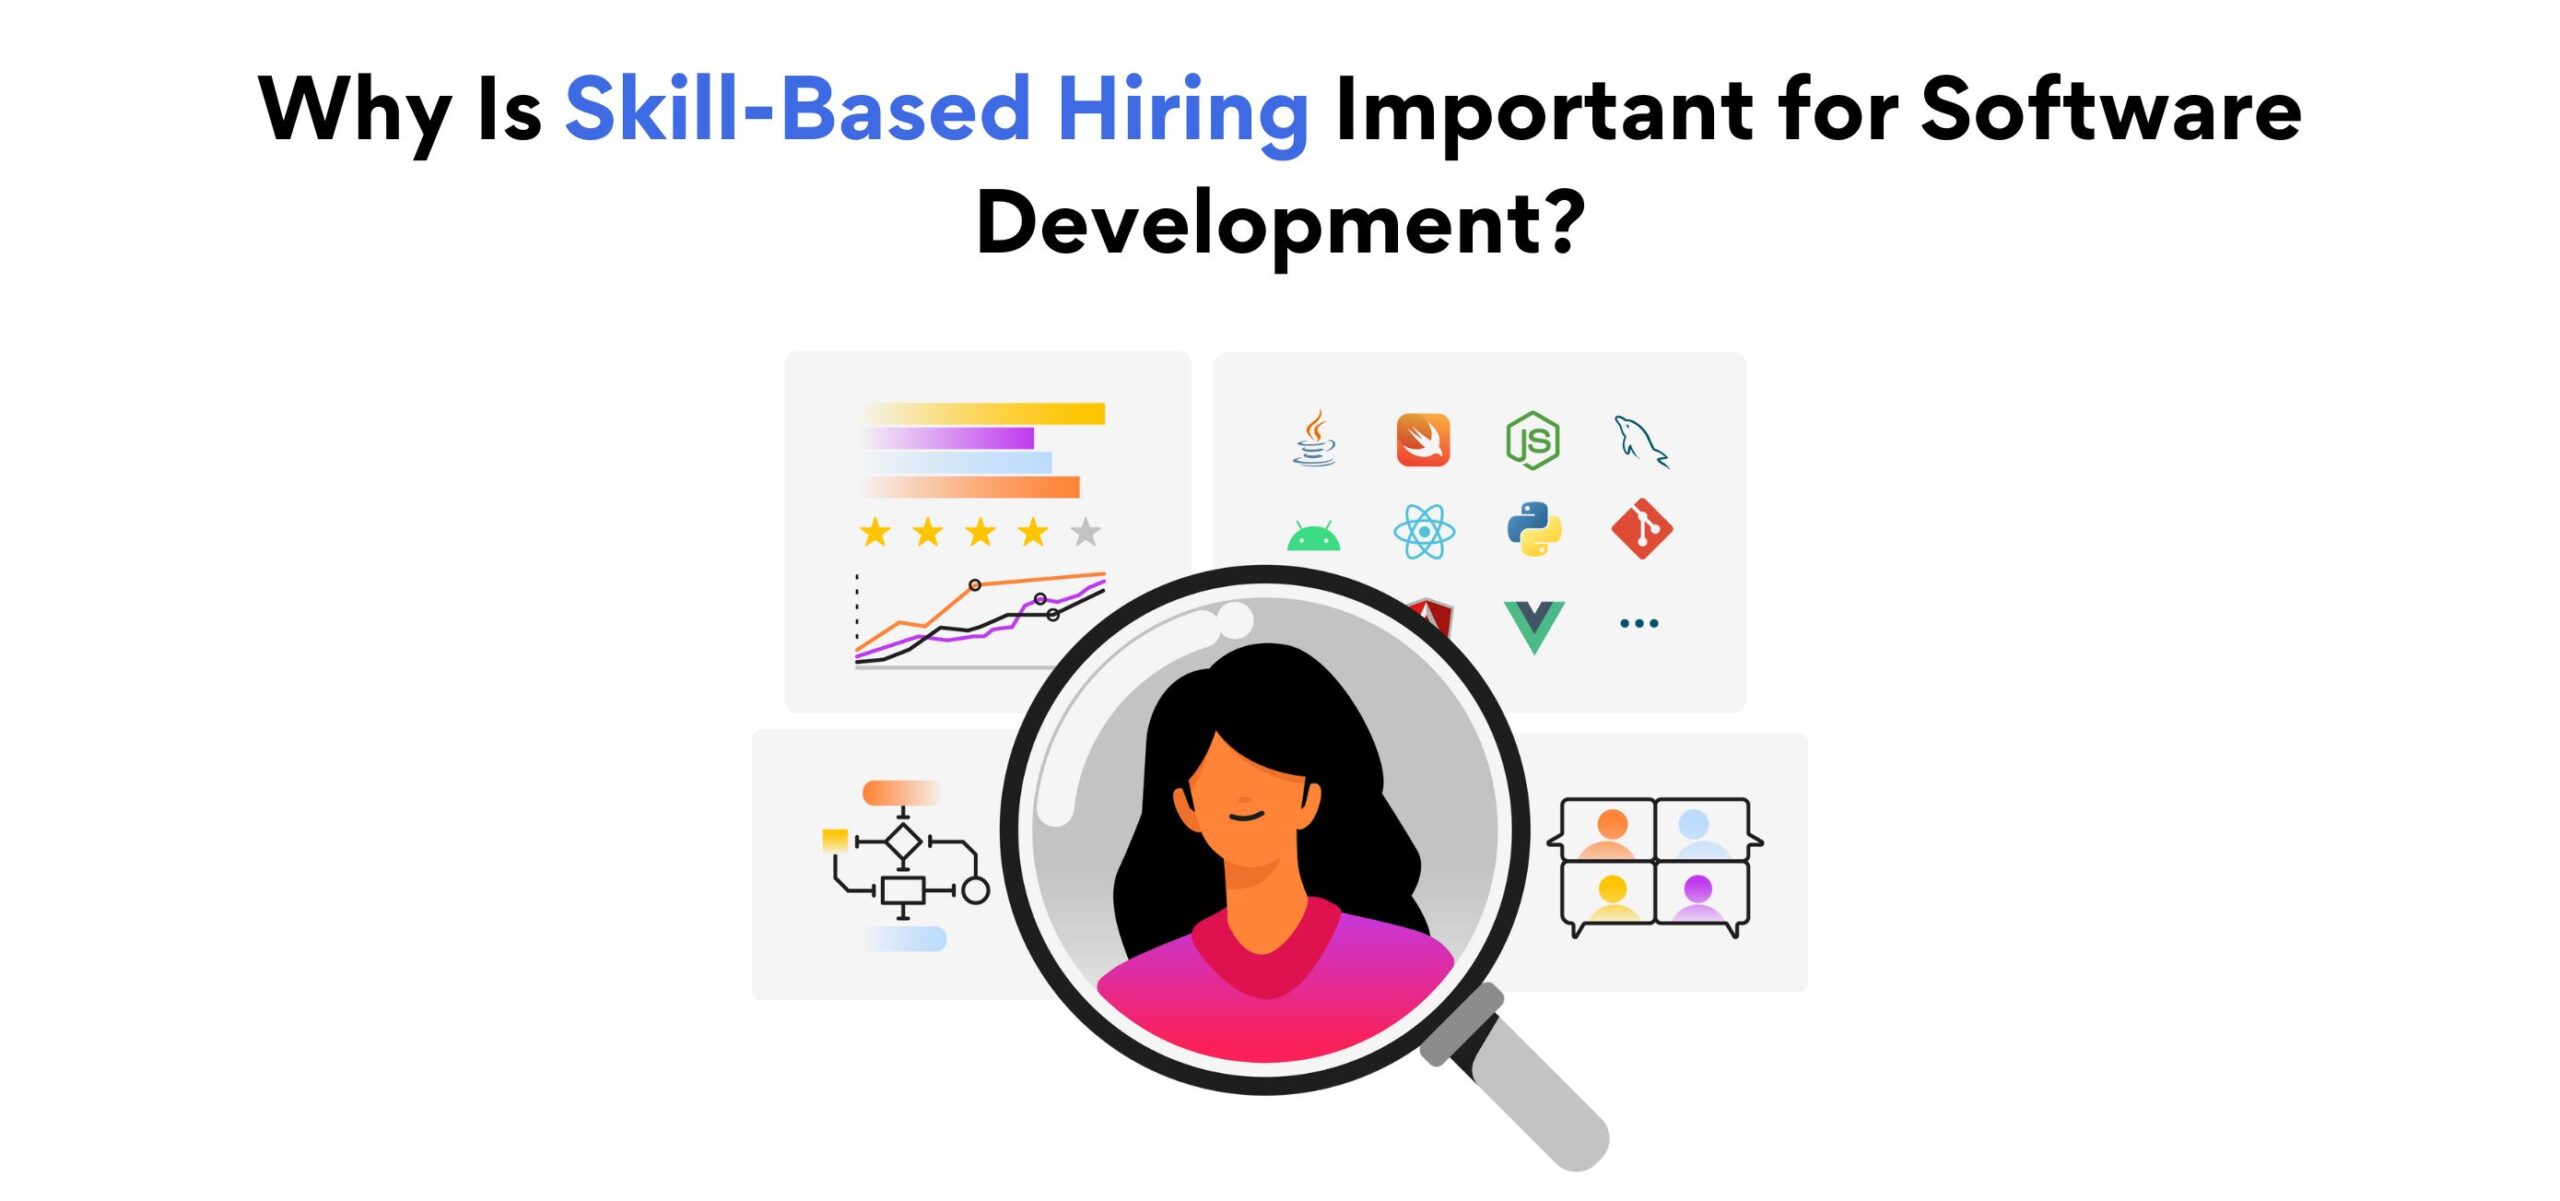 Skill-Based Hiring: Why Is It Important for Hiring Developers?